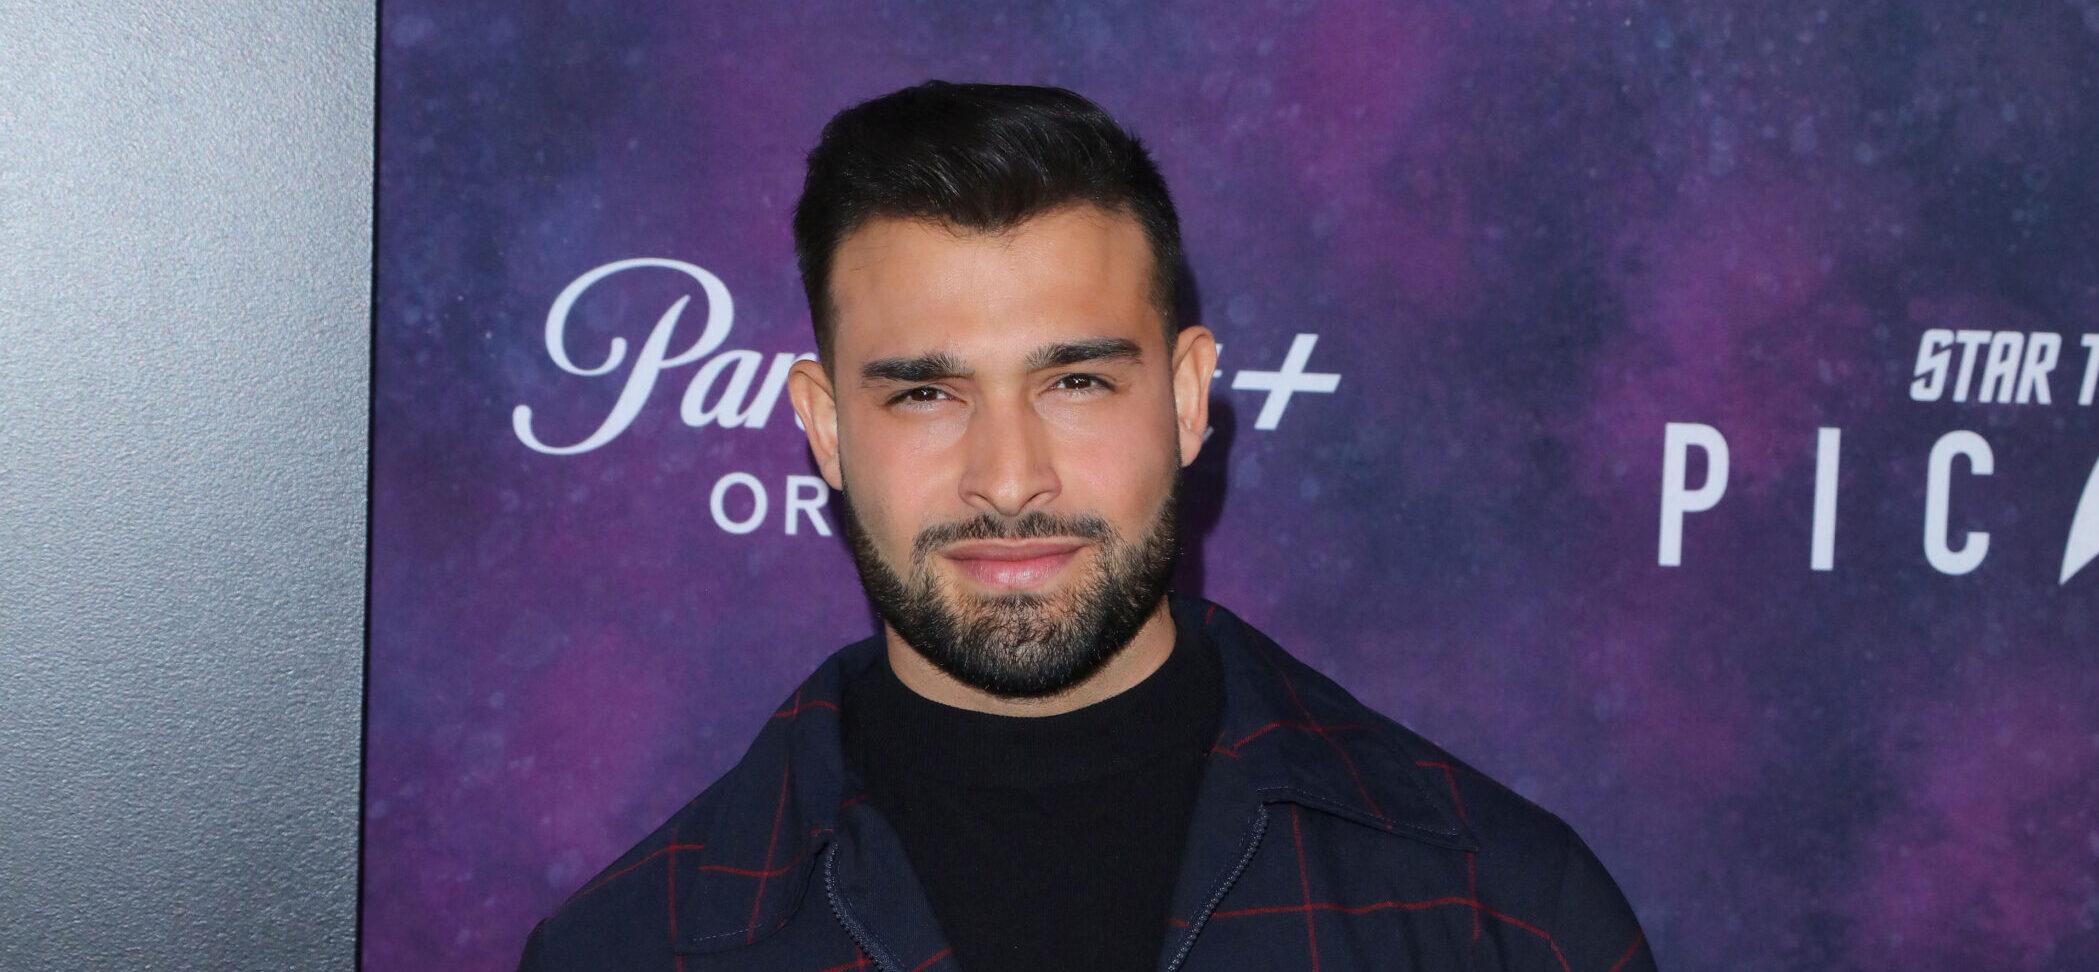 Sam Asghari Visits NYC One Week After Britney Spears For ‘Lots Of Pizza’